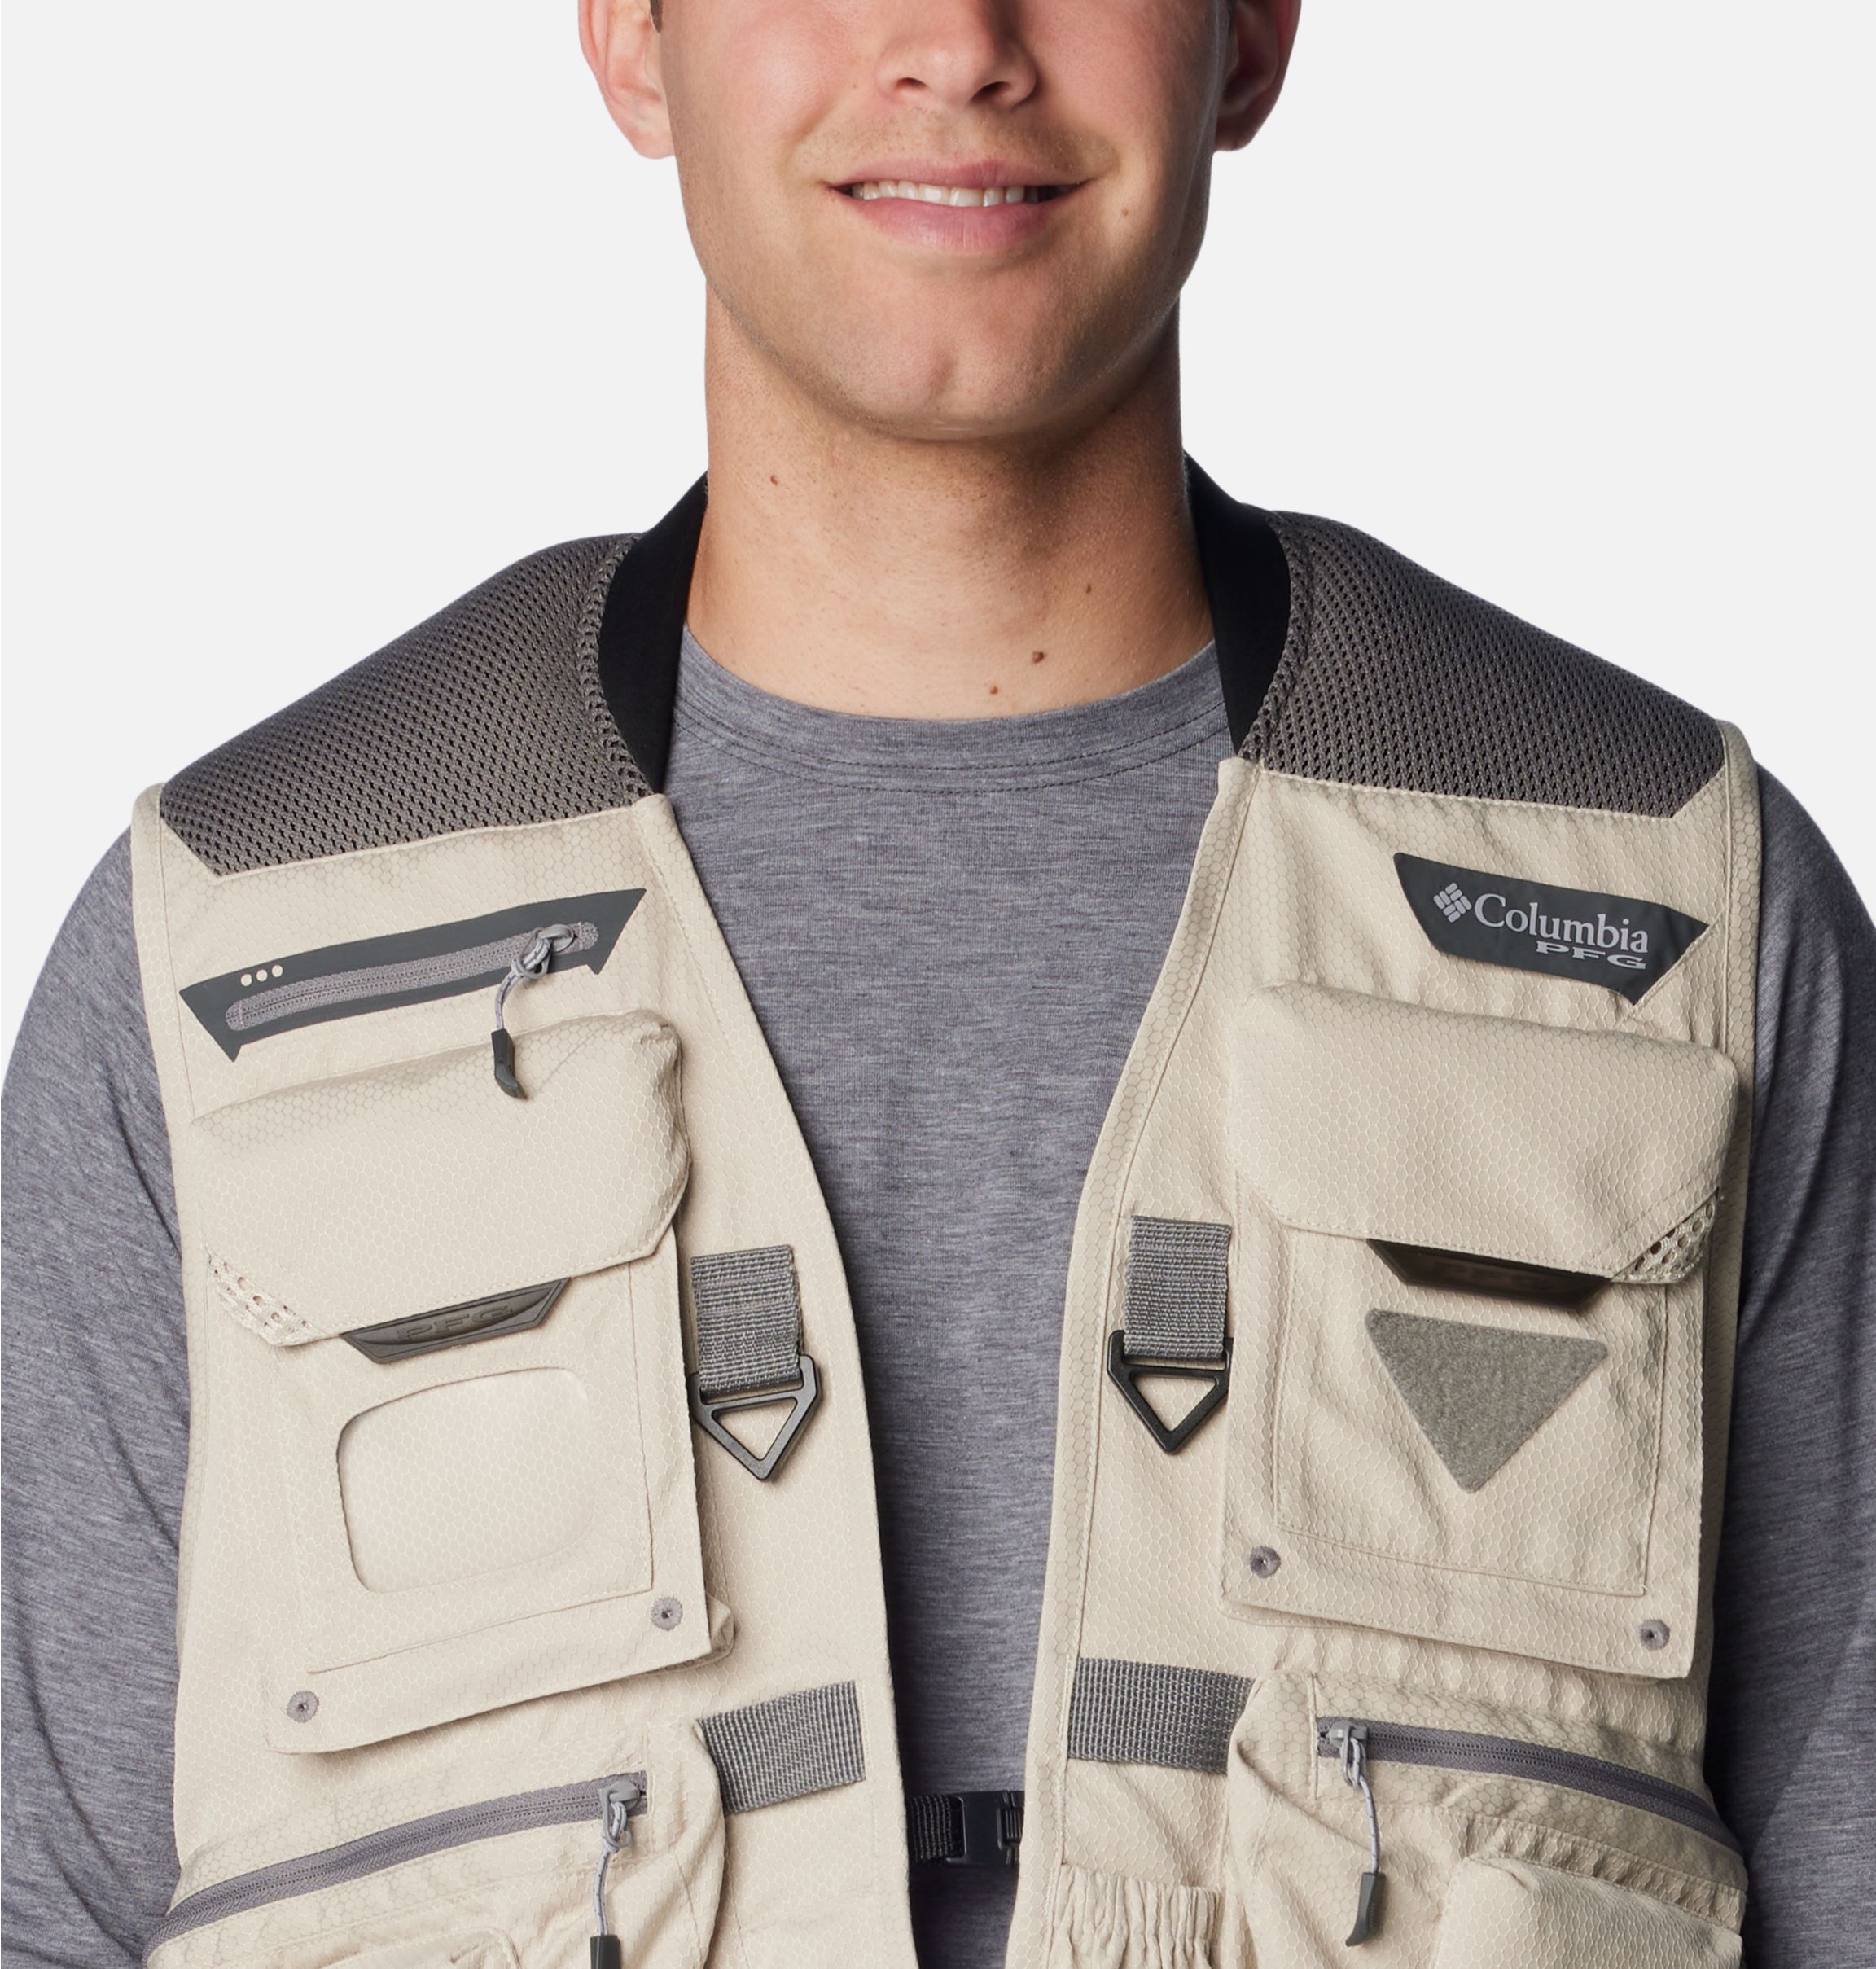 Item 850886 - Columbia Fishing vest - Fly Packs - Size M